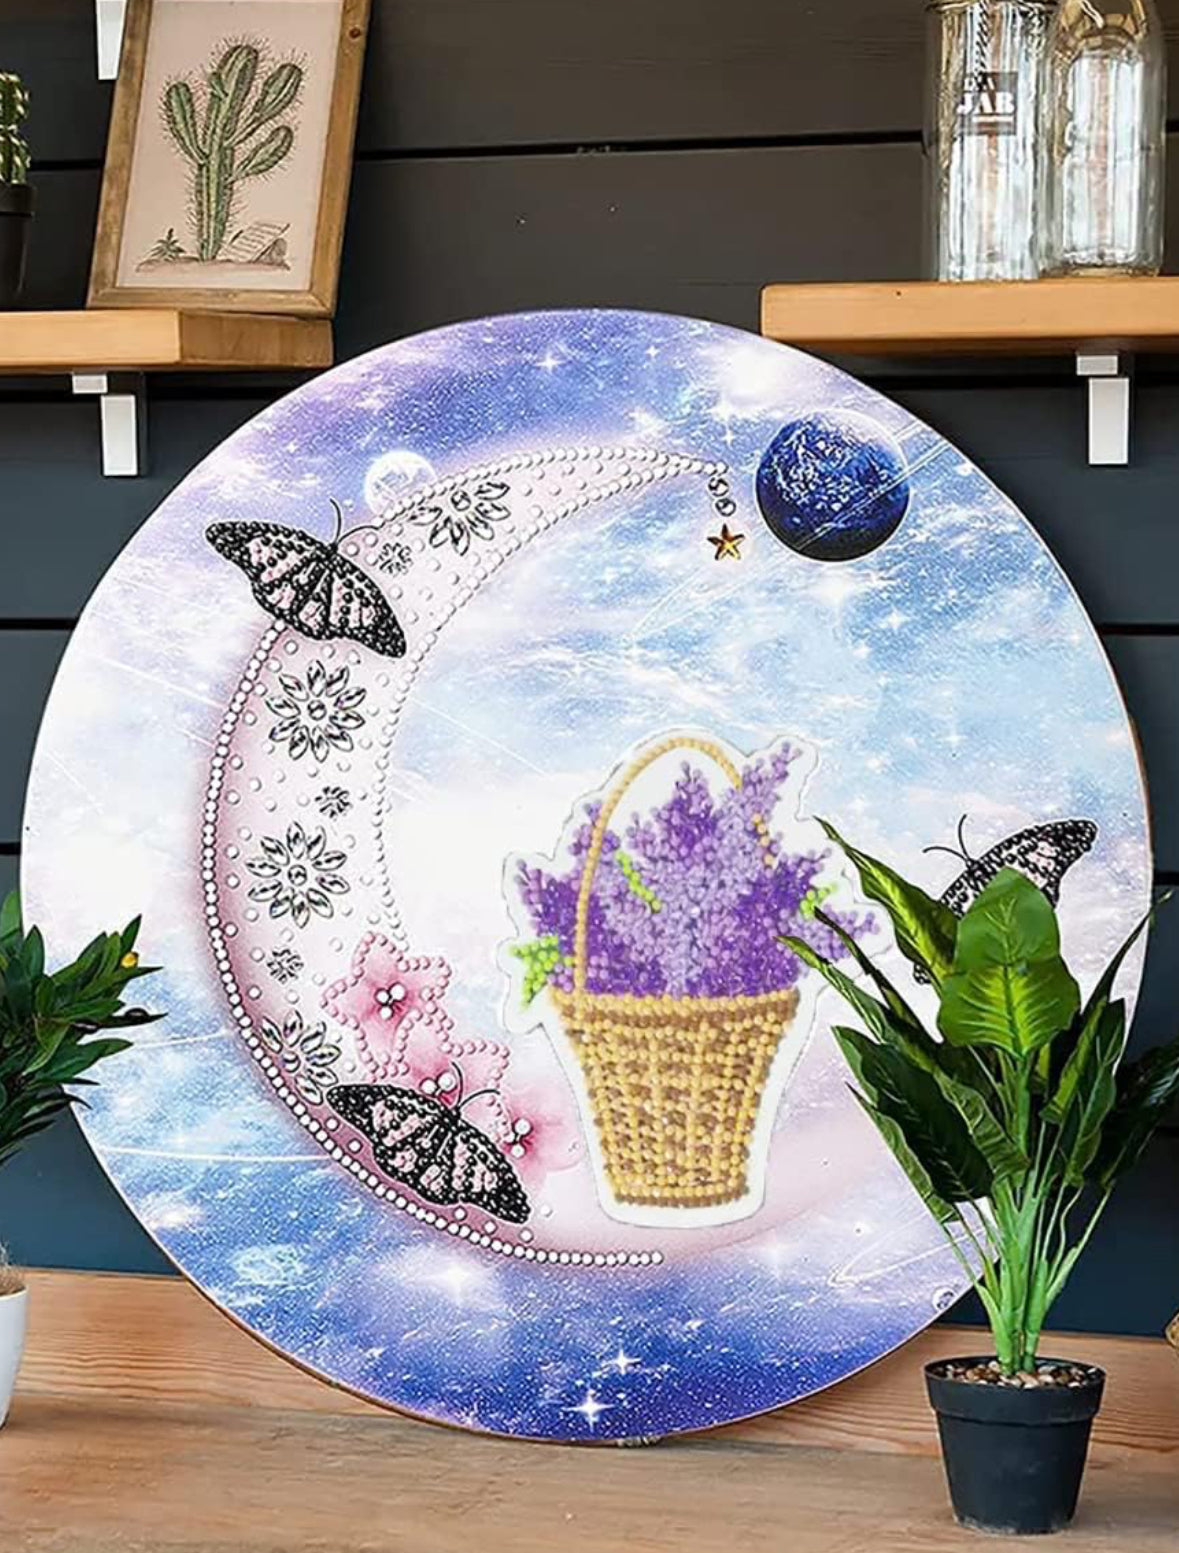 Moon Seasonal Sign Diamond Painting Kit with Interchangeable Accents